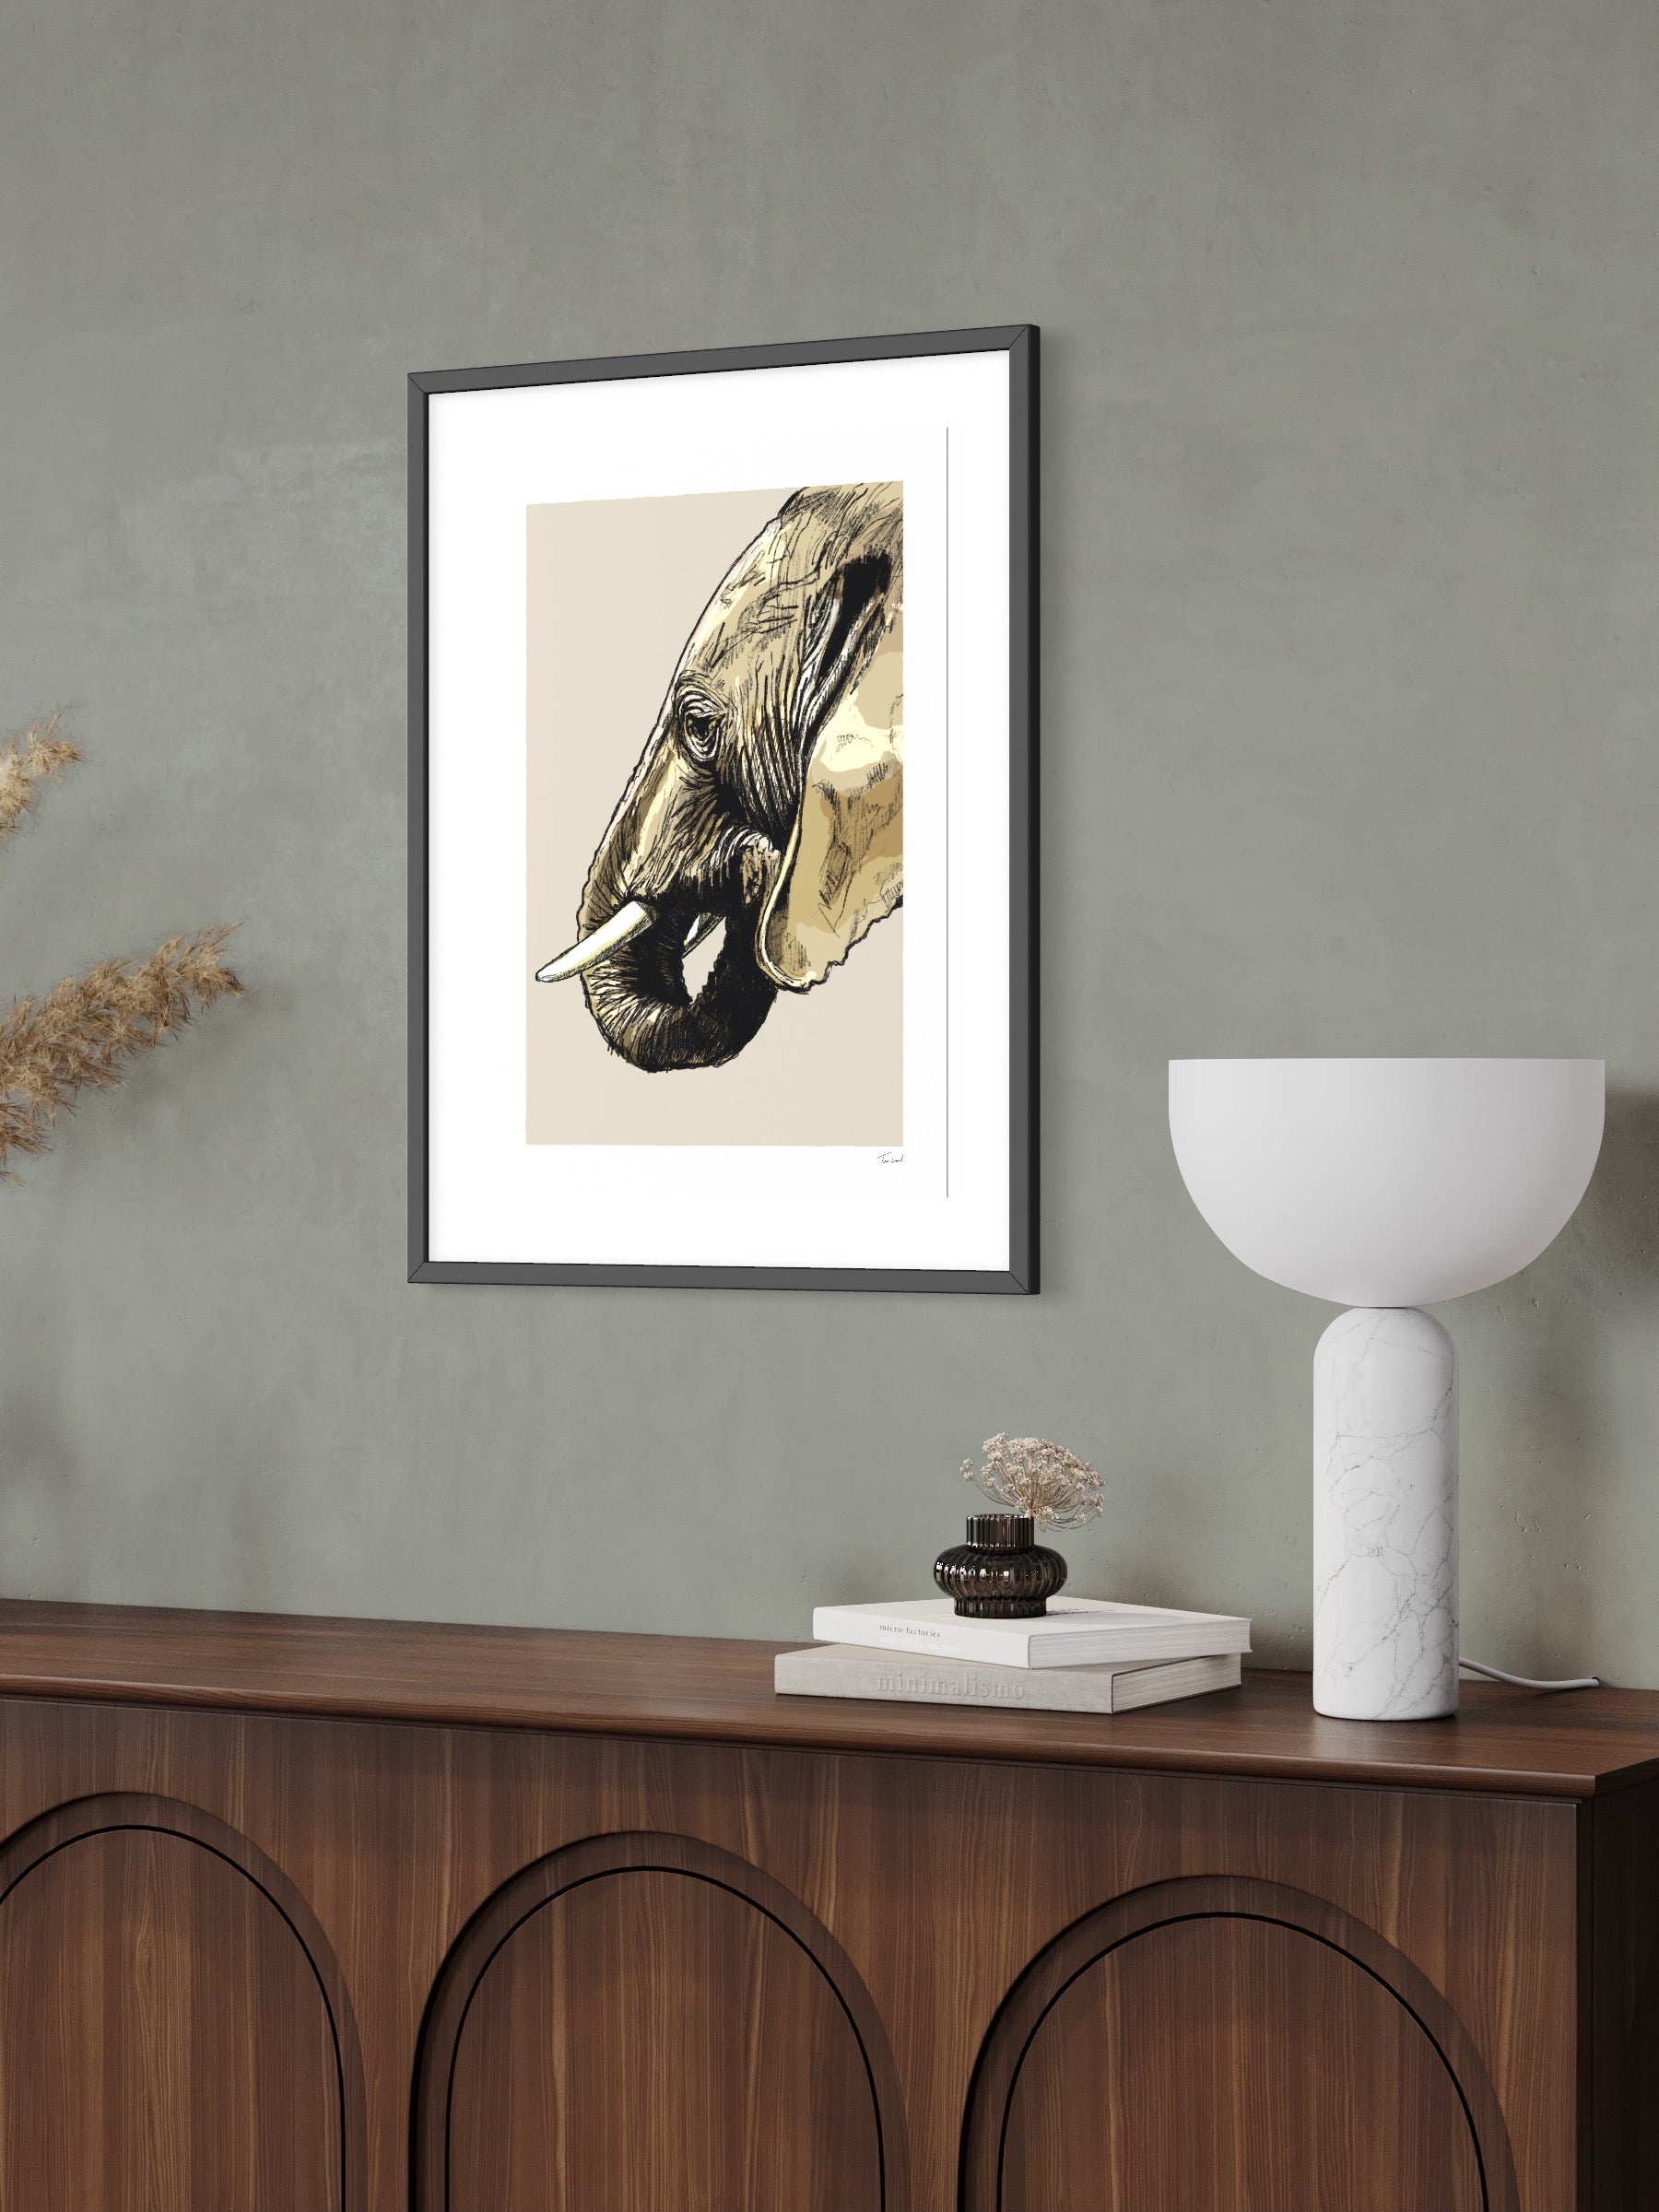 This image shows a giclee wall art print by Tom Laird Illustration of an Elephant, framed in a beautiful living room with tasteful modern home decor. This art print is available from Tom Laird Illustration in various sizes.